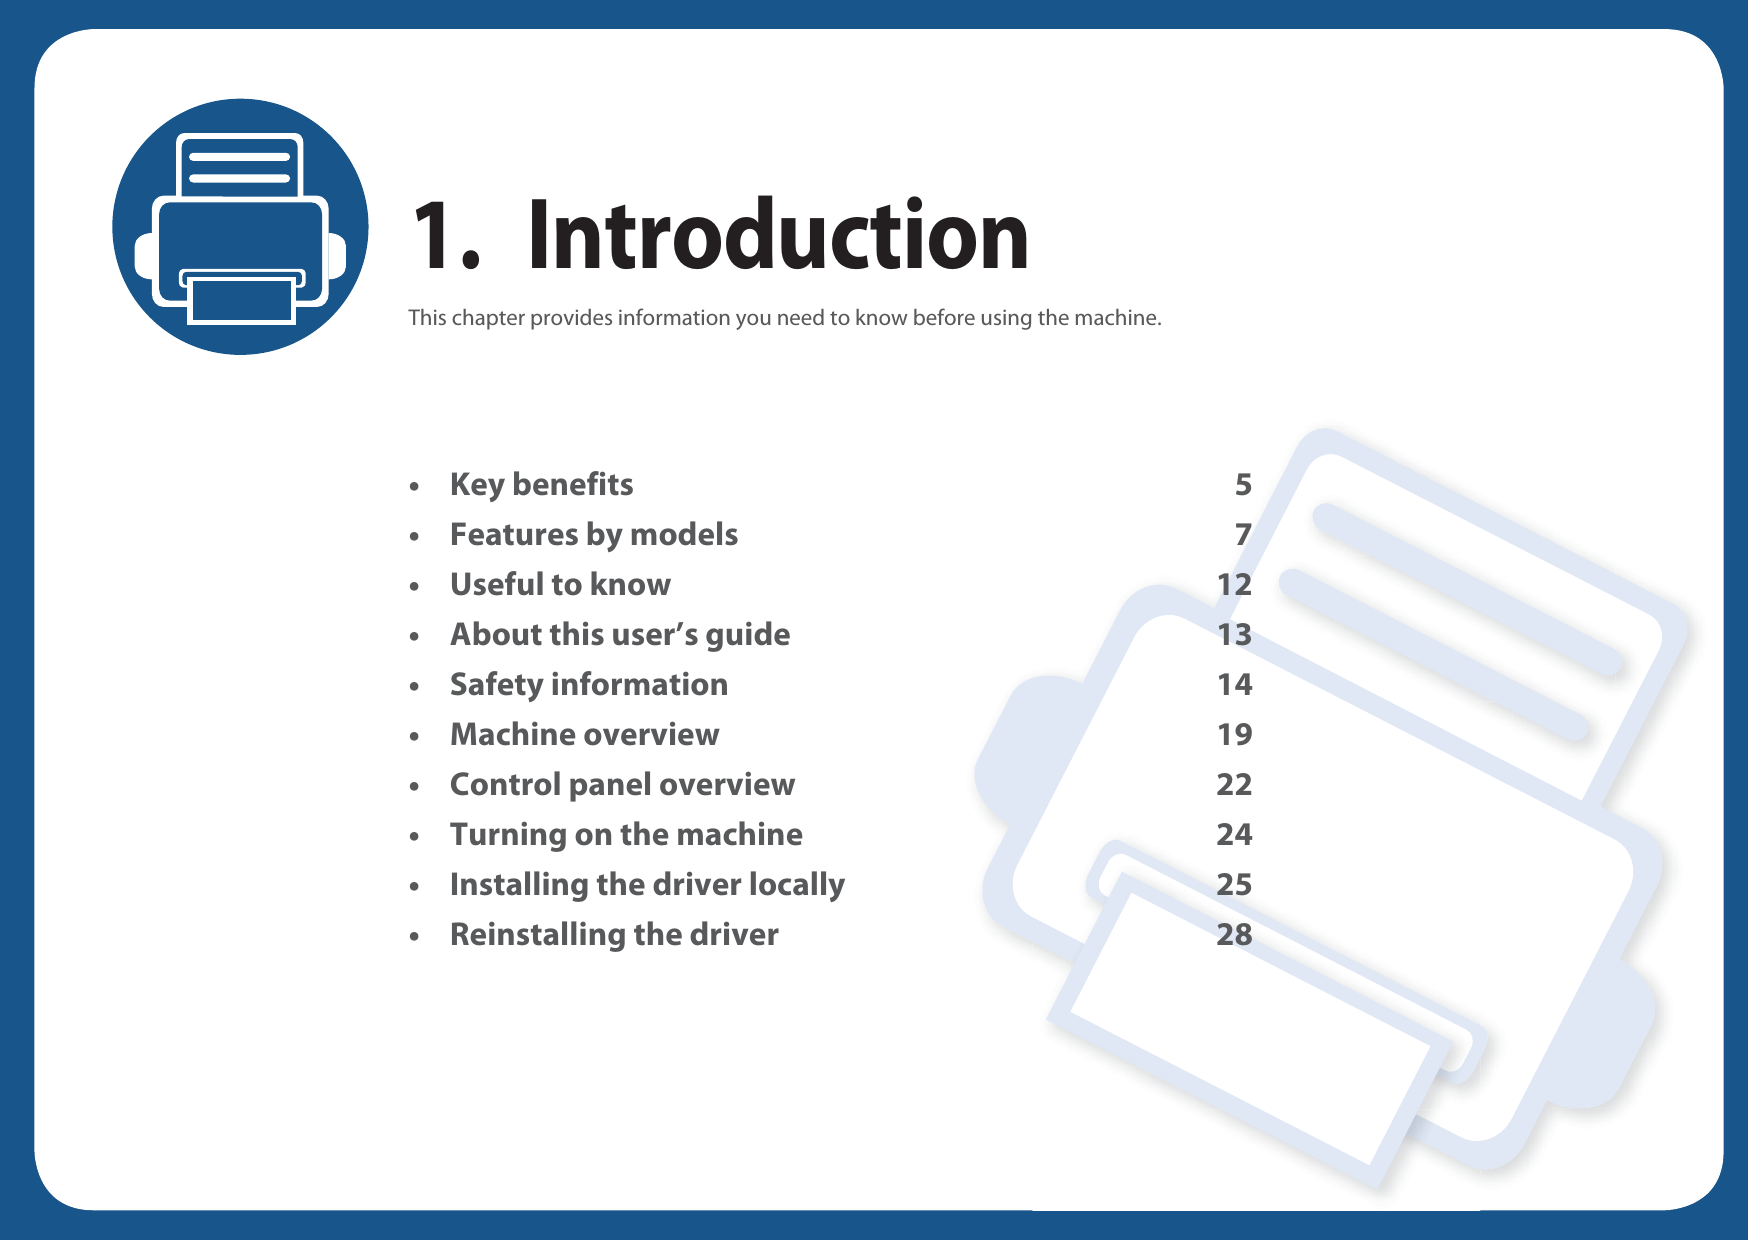 1. IntroductionThis chapter provides information you need to know before using the machine.• Key benefits 5• Features by models 7• Useful to know 12• About this user’s guide 13• Safety information 14• Machine overview 19• Control panel overview 22• Turning on the machine 24• Installing the driver locally 25• Reinstalling the driver 28